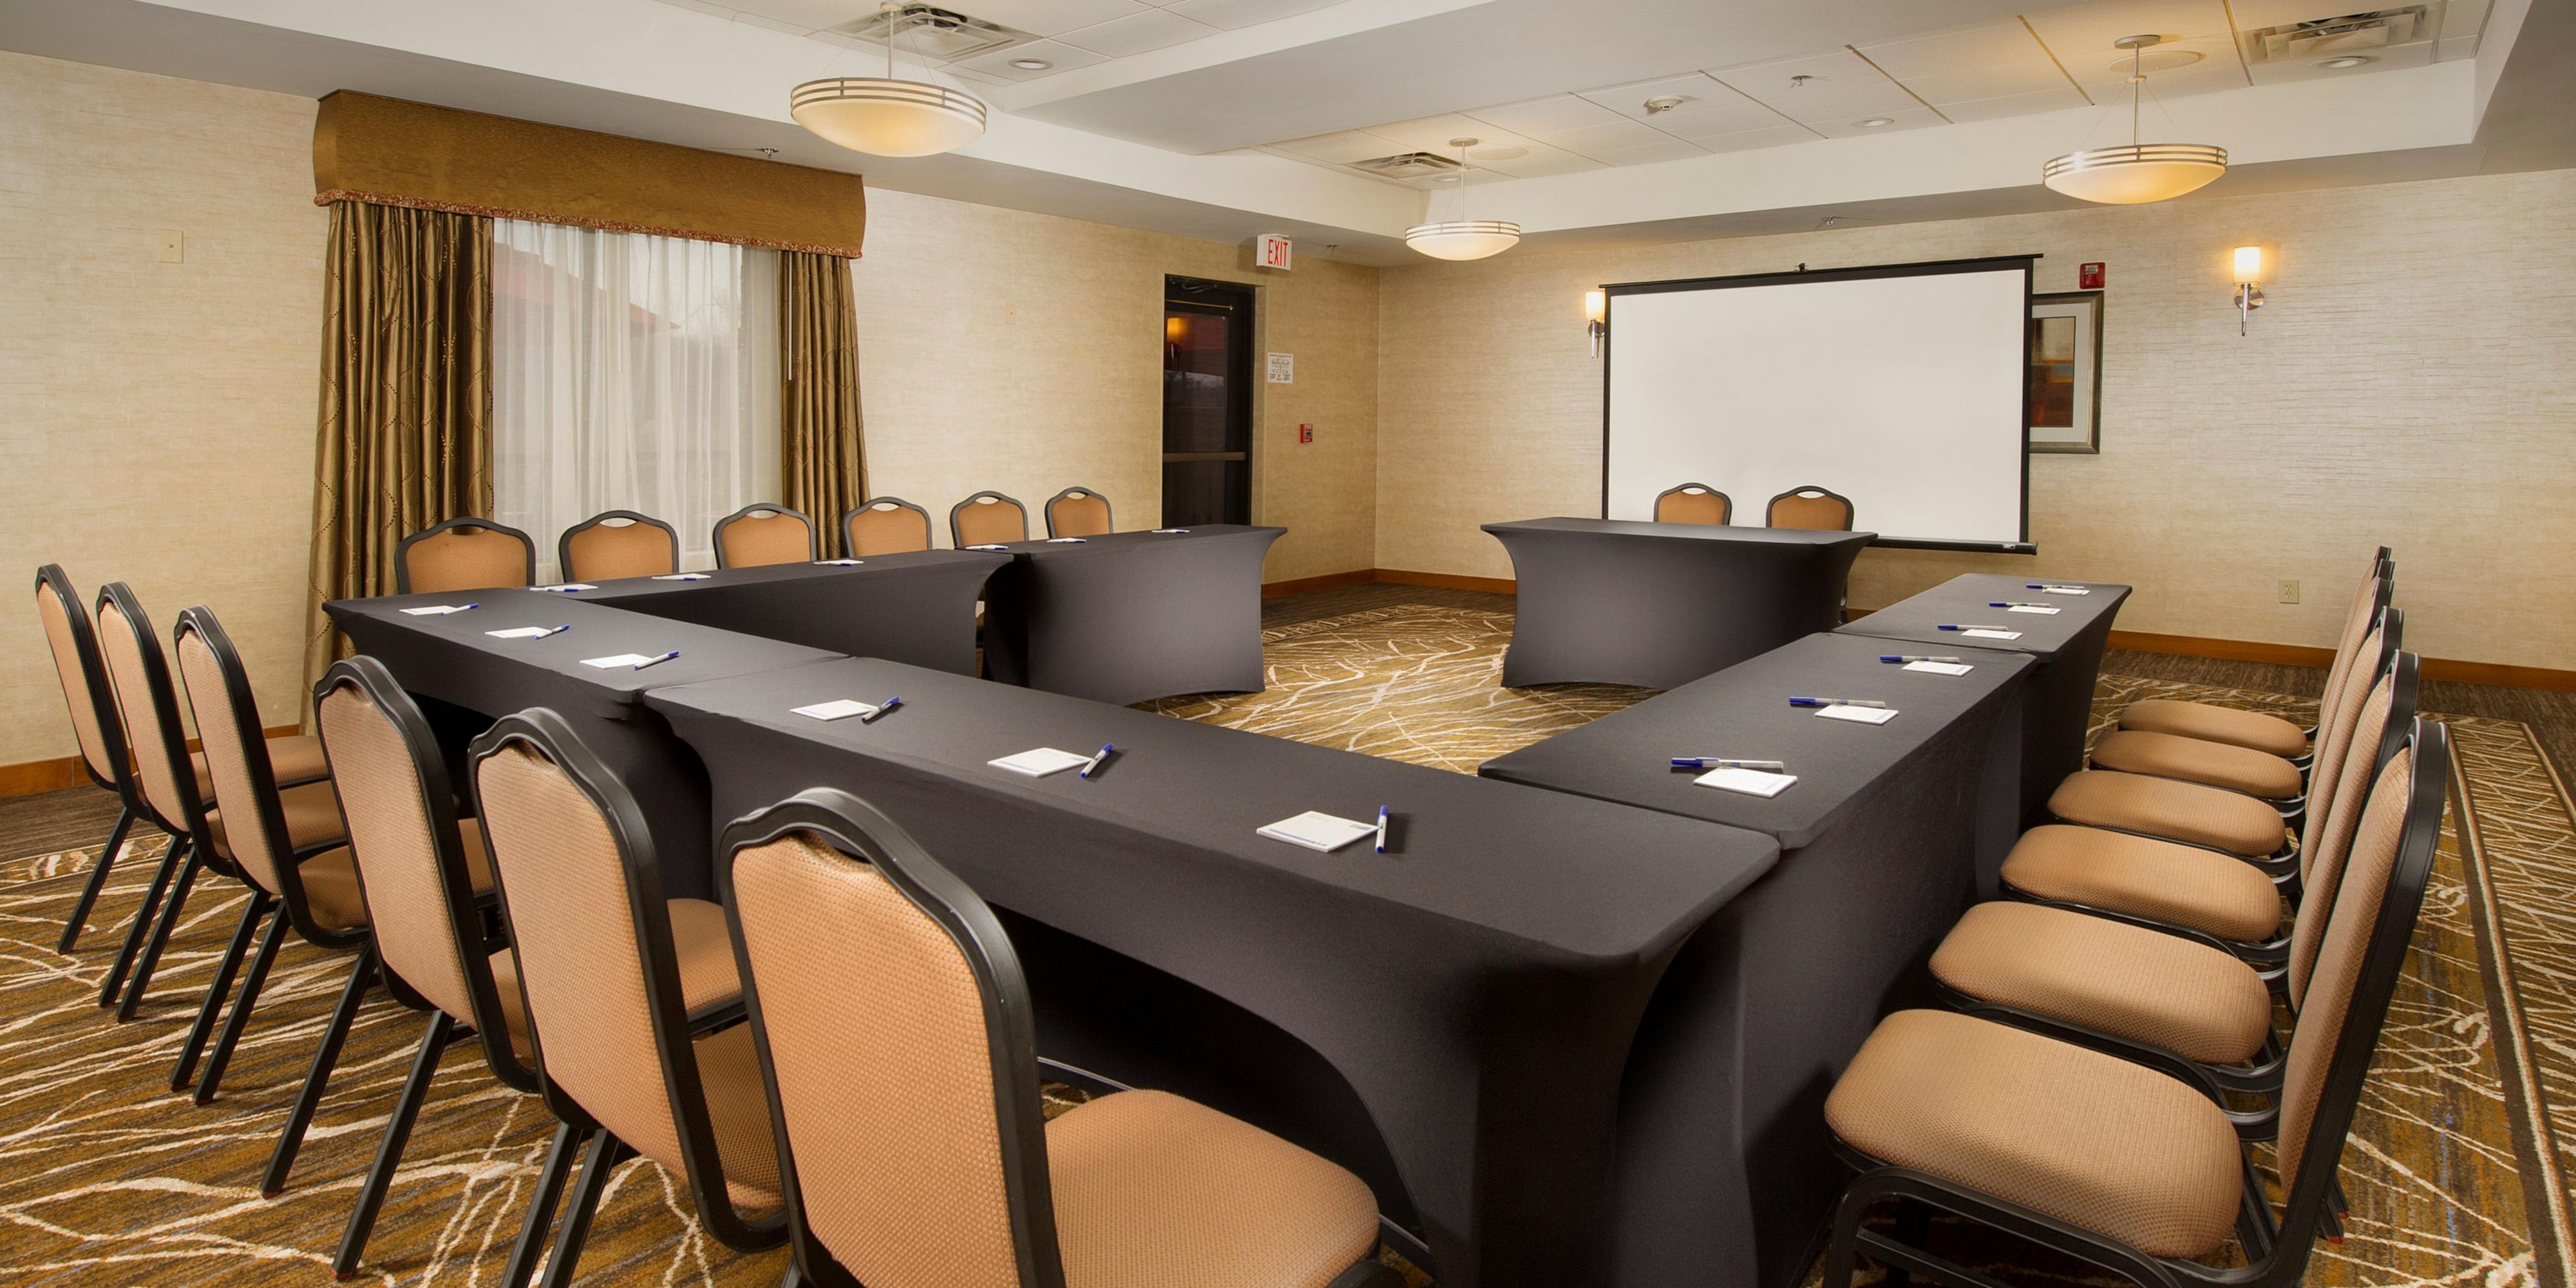 Host your next corporate meeting or social gathering in 912 sq. ft. of contemporary meeting space. Seating for a maximum of 60 people, patio off of meeting room, wet bar, complimentary wireless internet, conference phone, LCD projector available for rental. Bring your own food or order from local caterers.